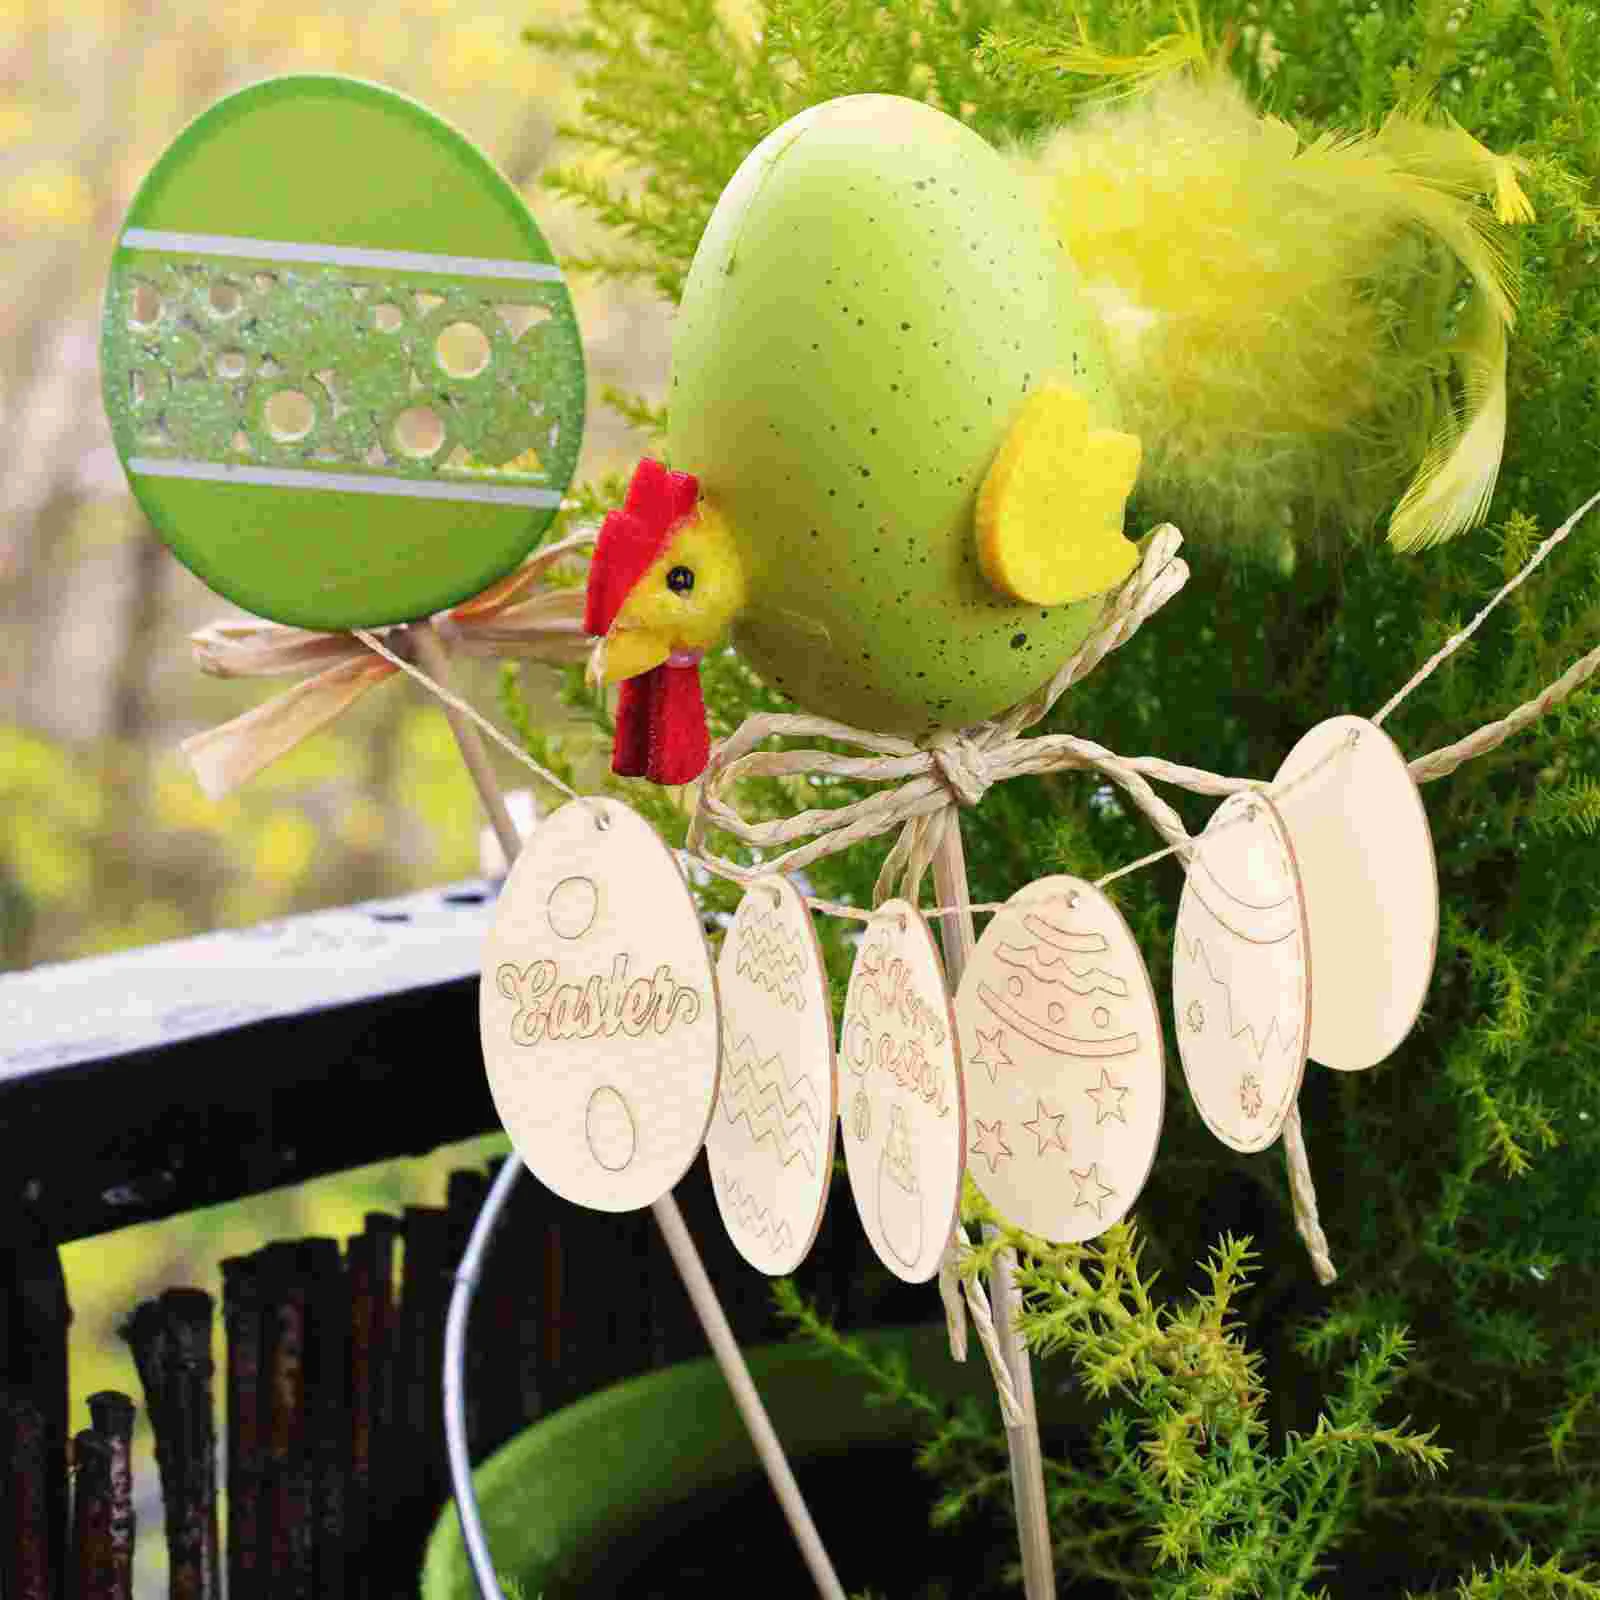 

Easter Egg Wood Wooden Cutouts Slices Crafts Hanging Eggs Pieces Diy Ornaments Pendant Tag Unfinished Shapes Discs Ornament Gift